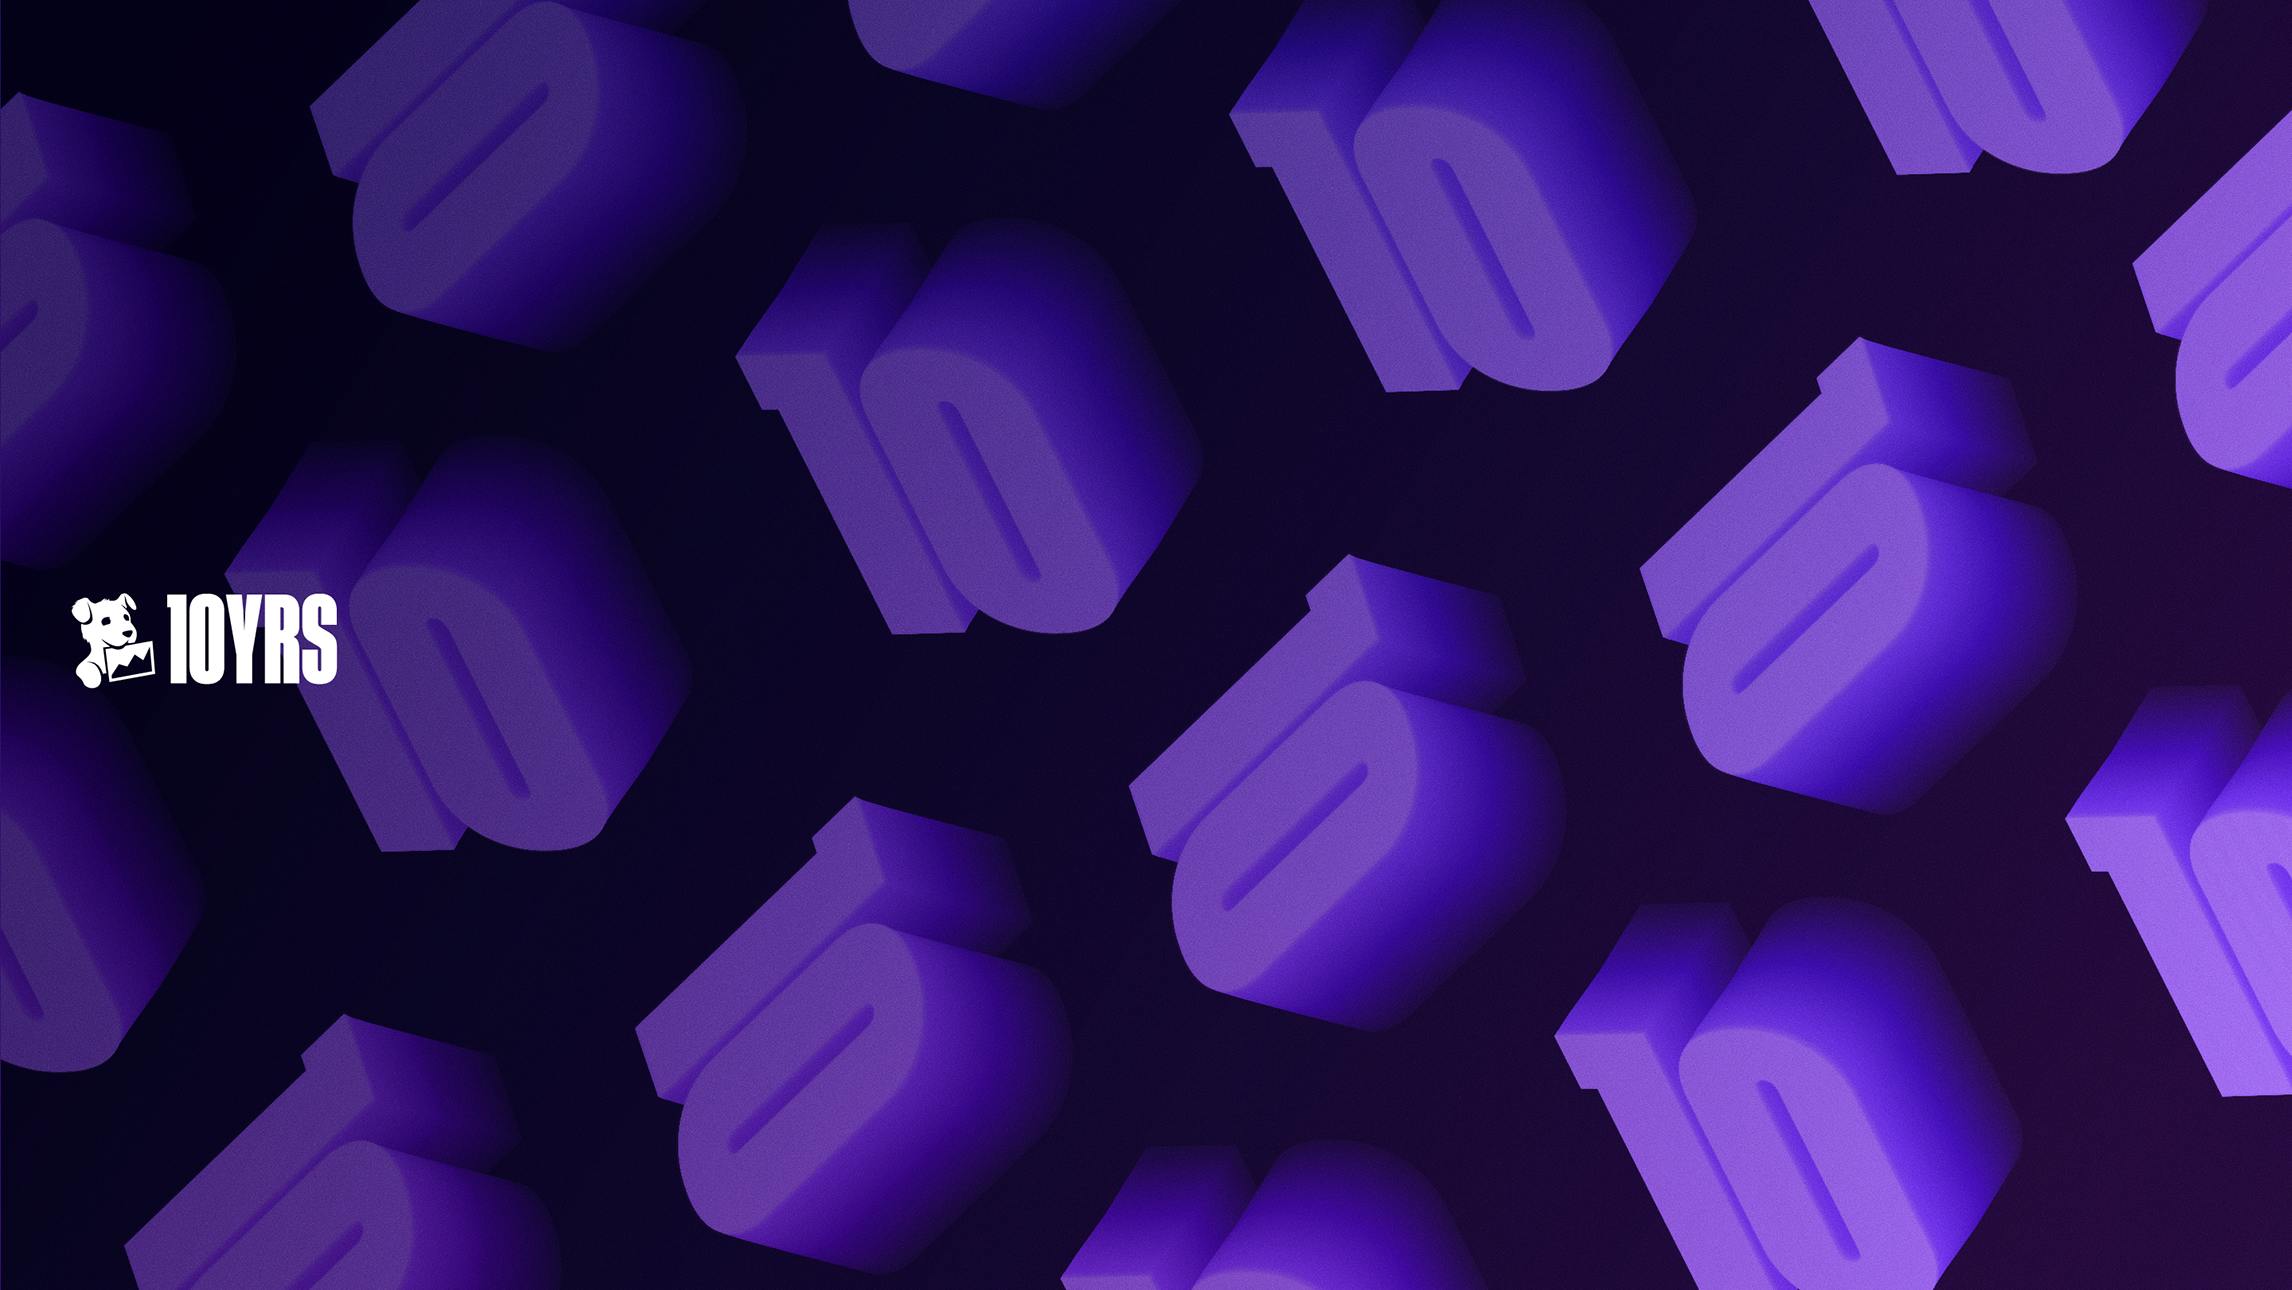 A digital background comprised of repeated 3d illustrations of the number 10, staggered and angled on a dark purple background. The Datadog logo(white) and the text '10YRS' in bold white lettring are vertically centered on the left side.